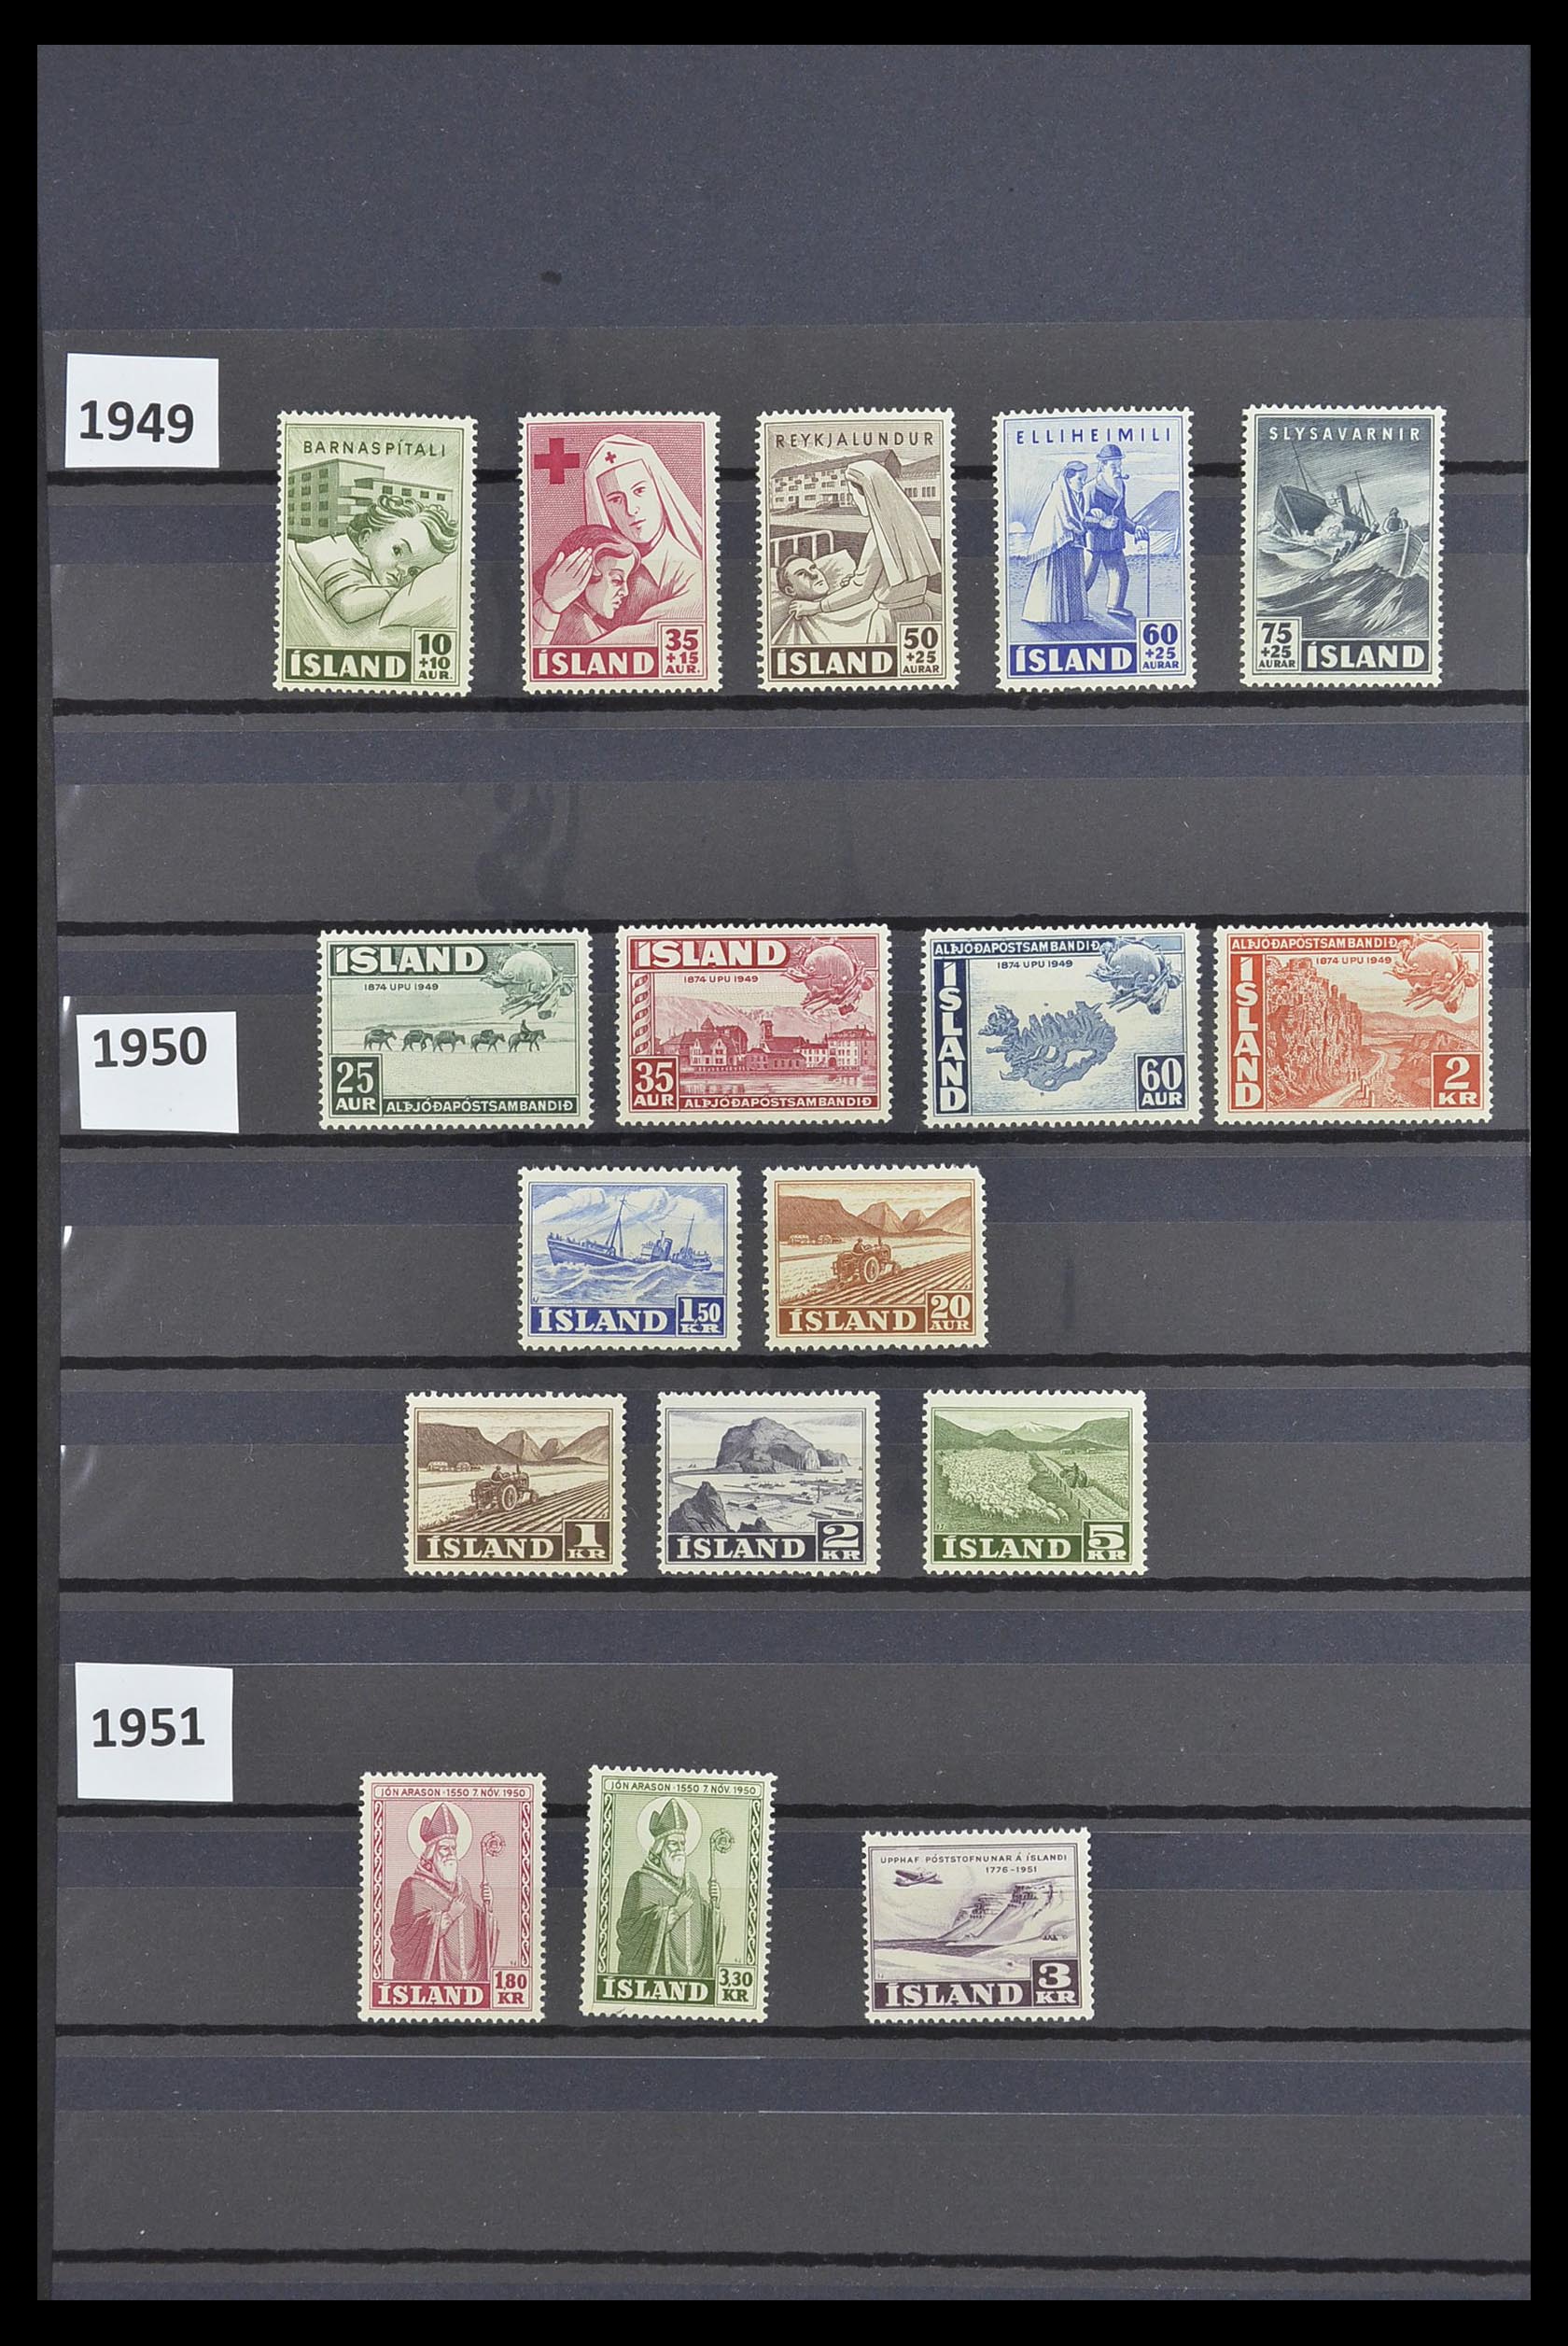 33726 087 - Stamp collection 33726 Scandinavia up to 2006.